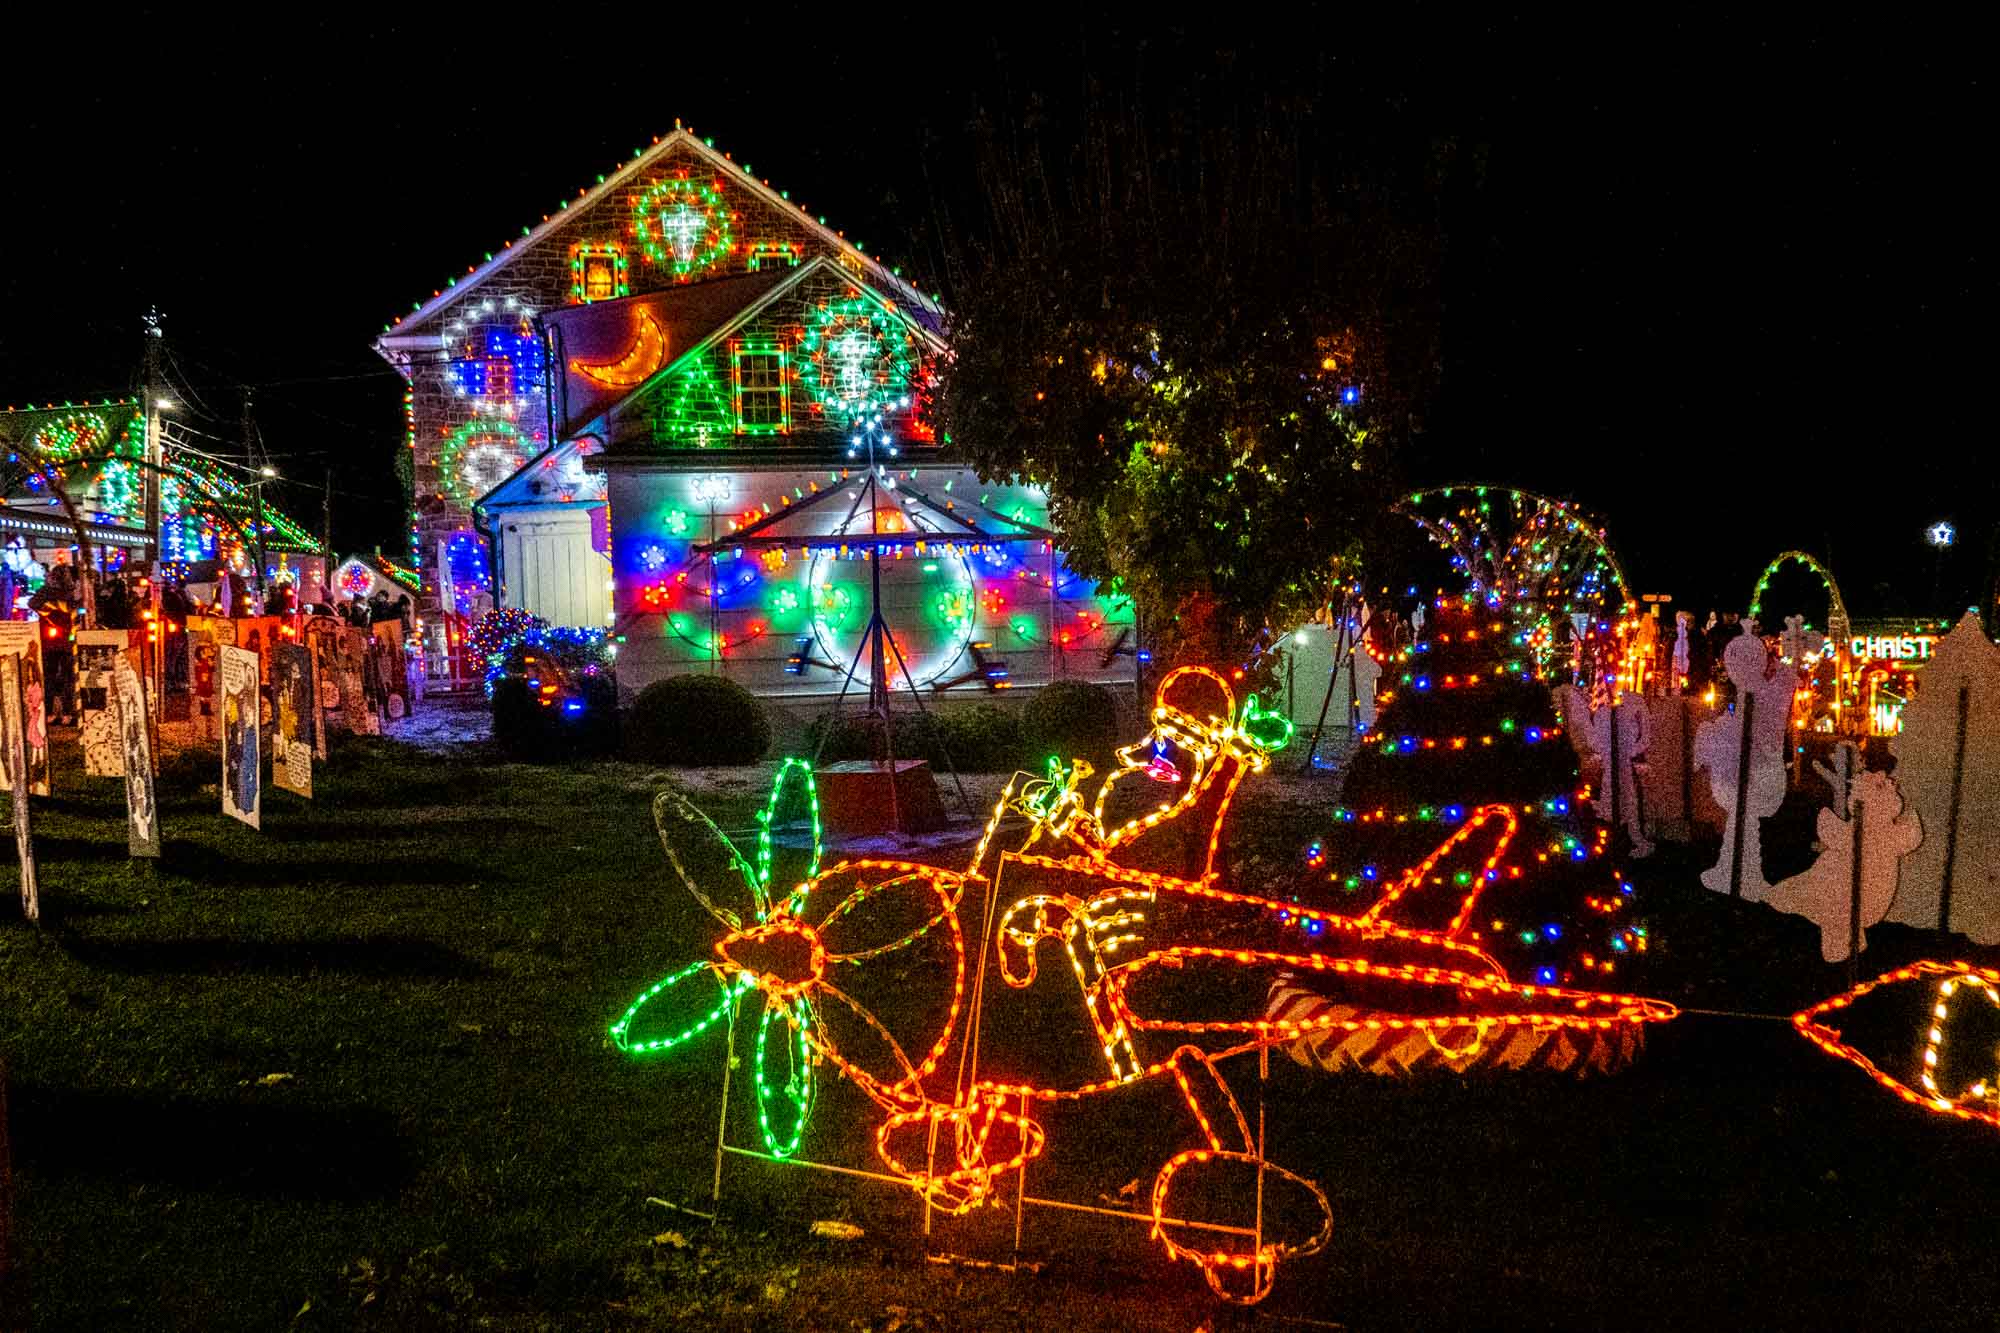 Christmas light display of Santa in an airplane and an illuminated house